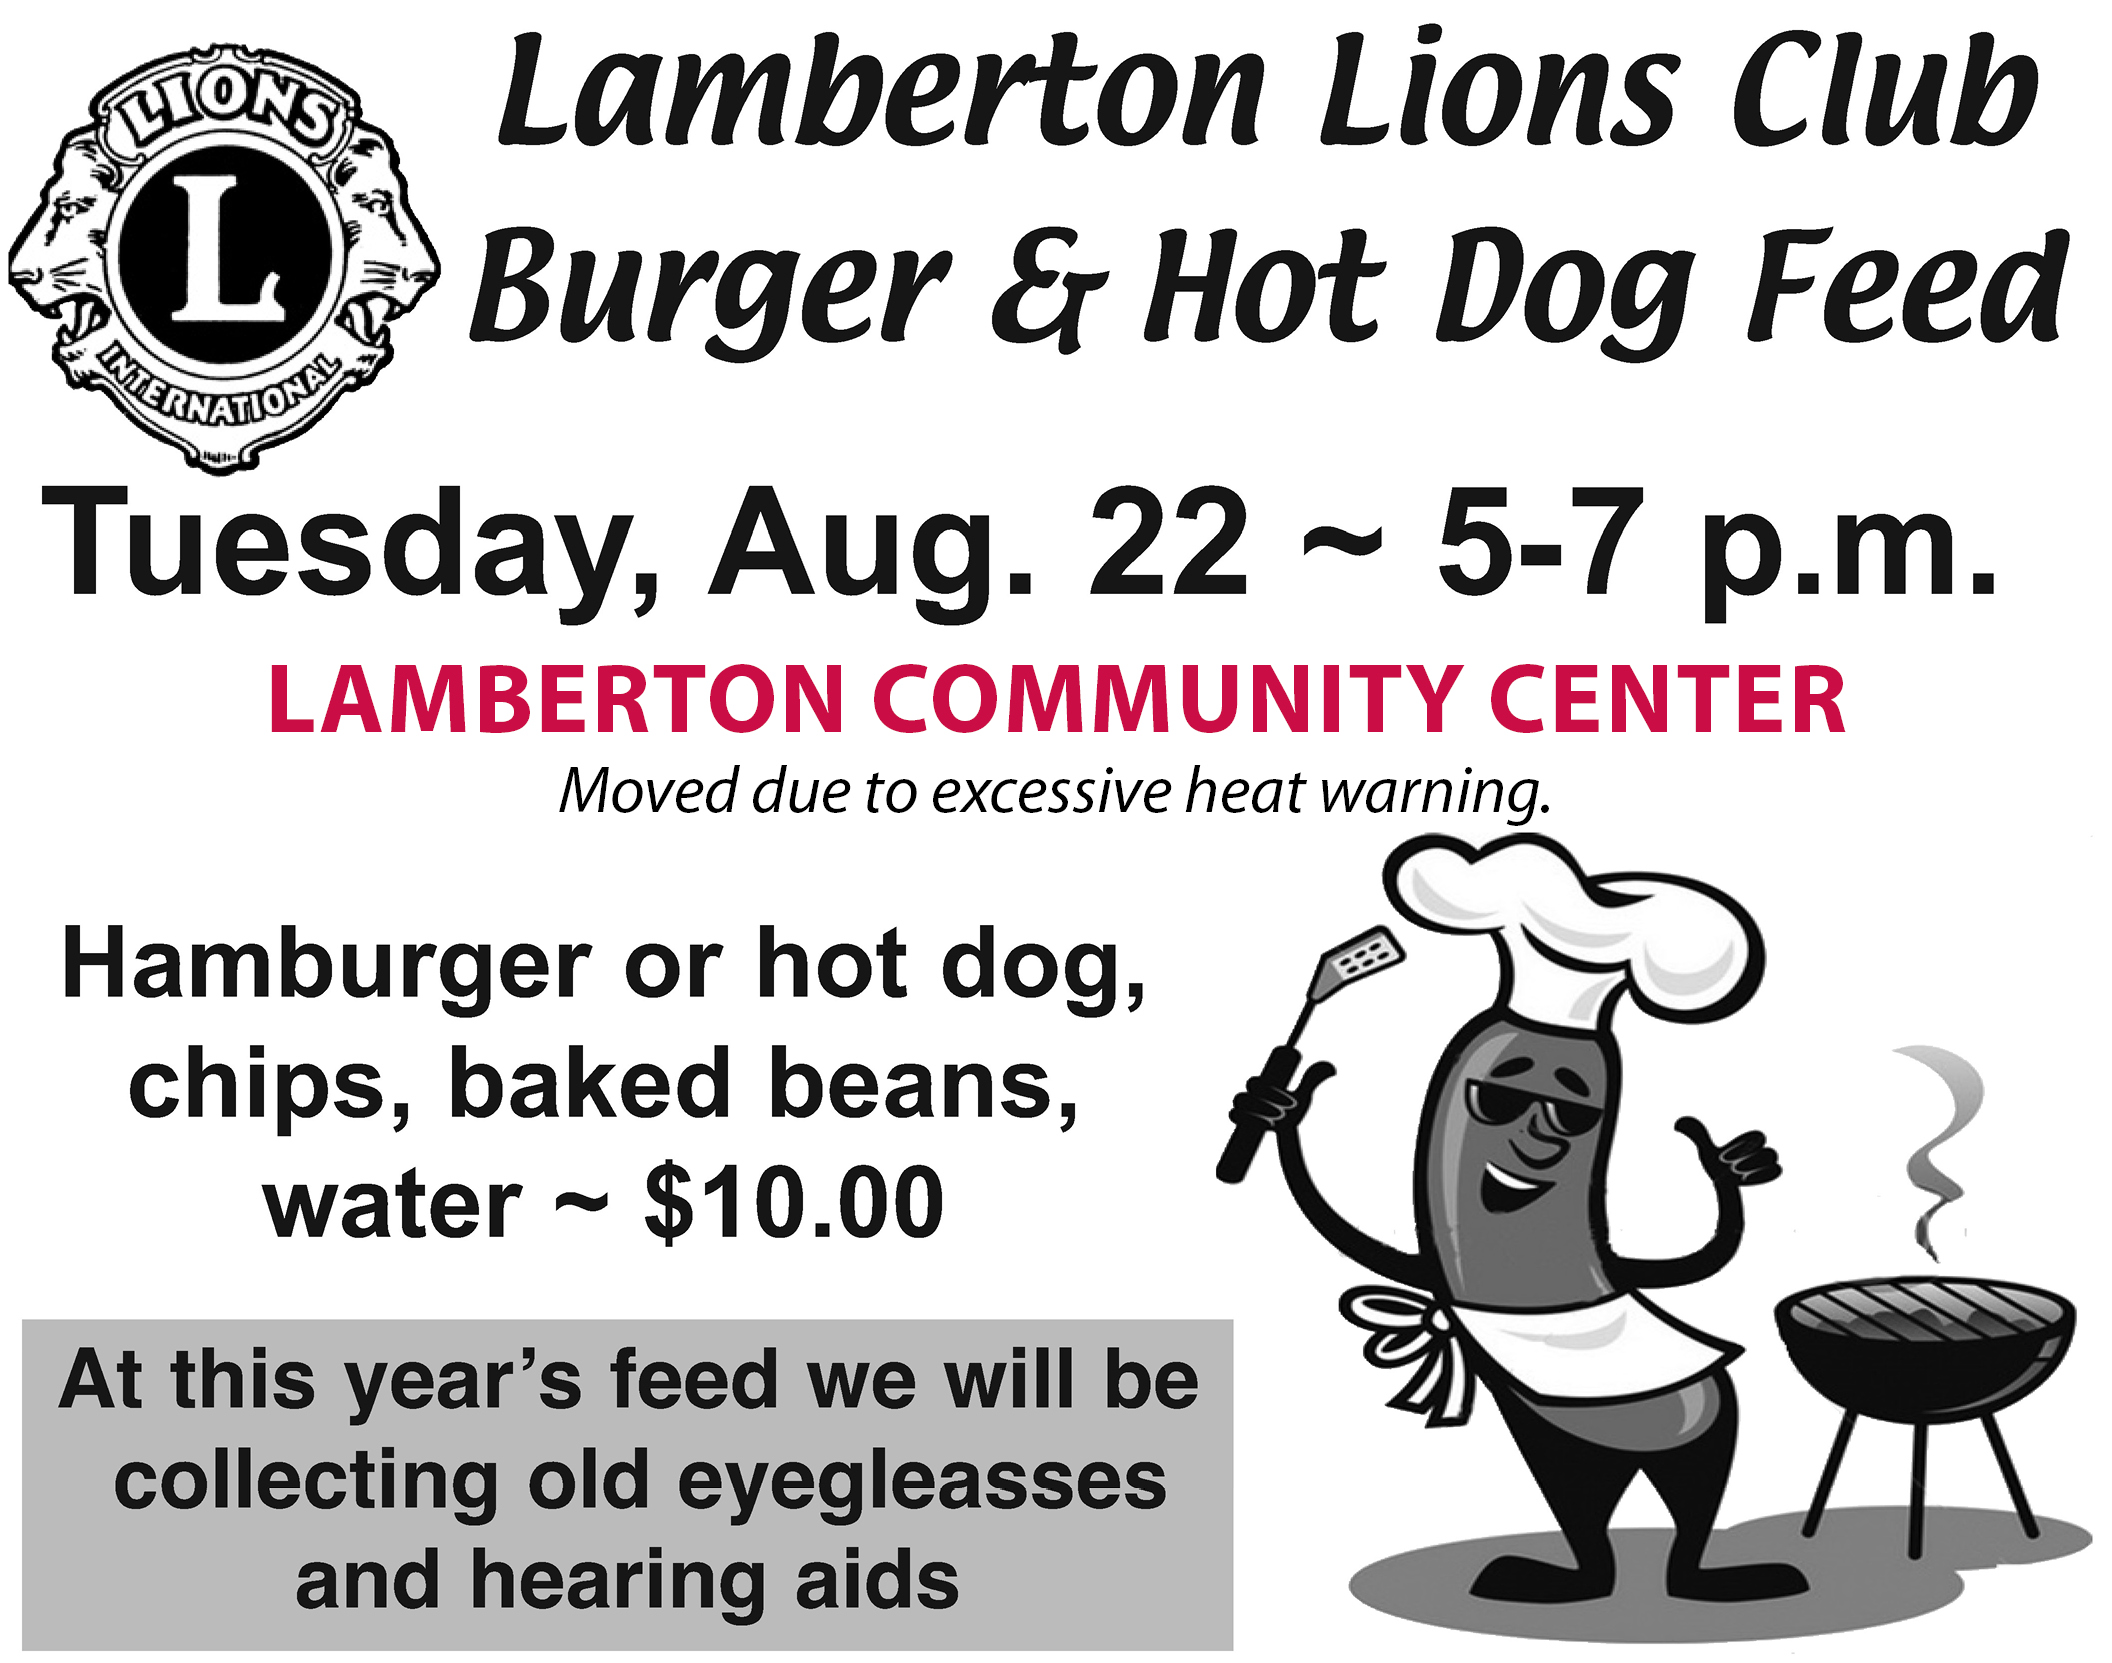 <h1 class="tribe-events-single-event-title">LAMBERTON LIONS CLUB FEED</h1>